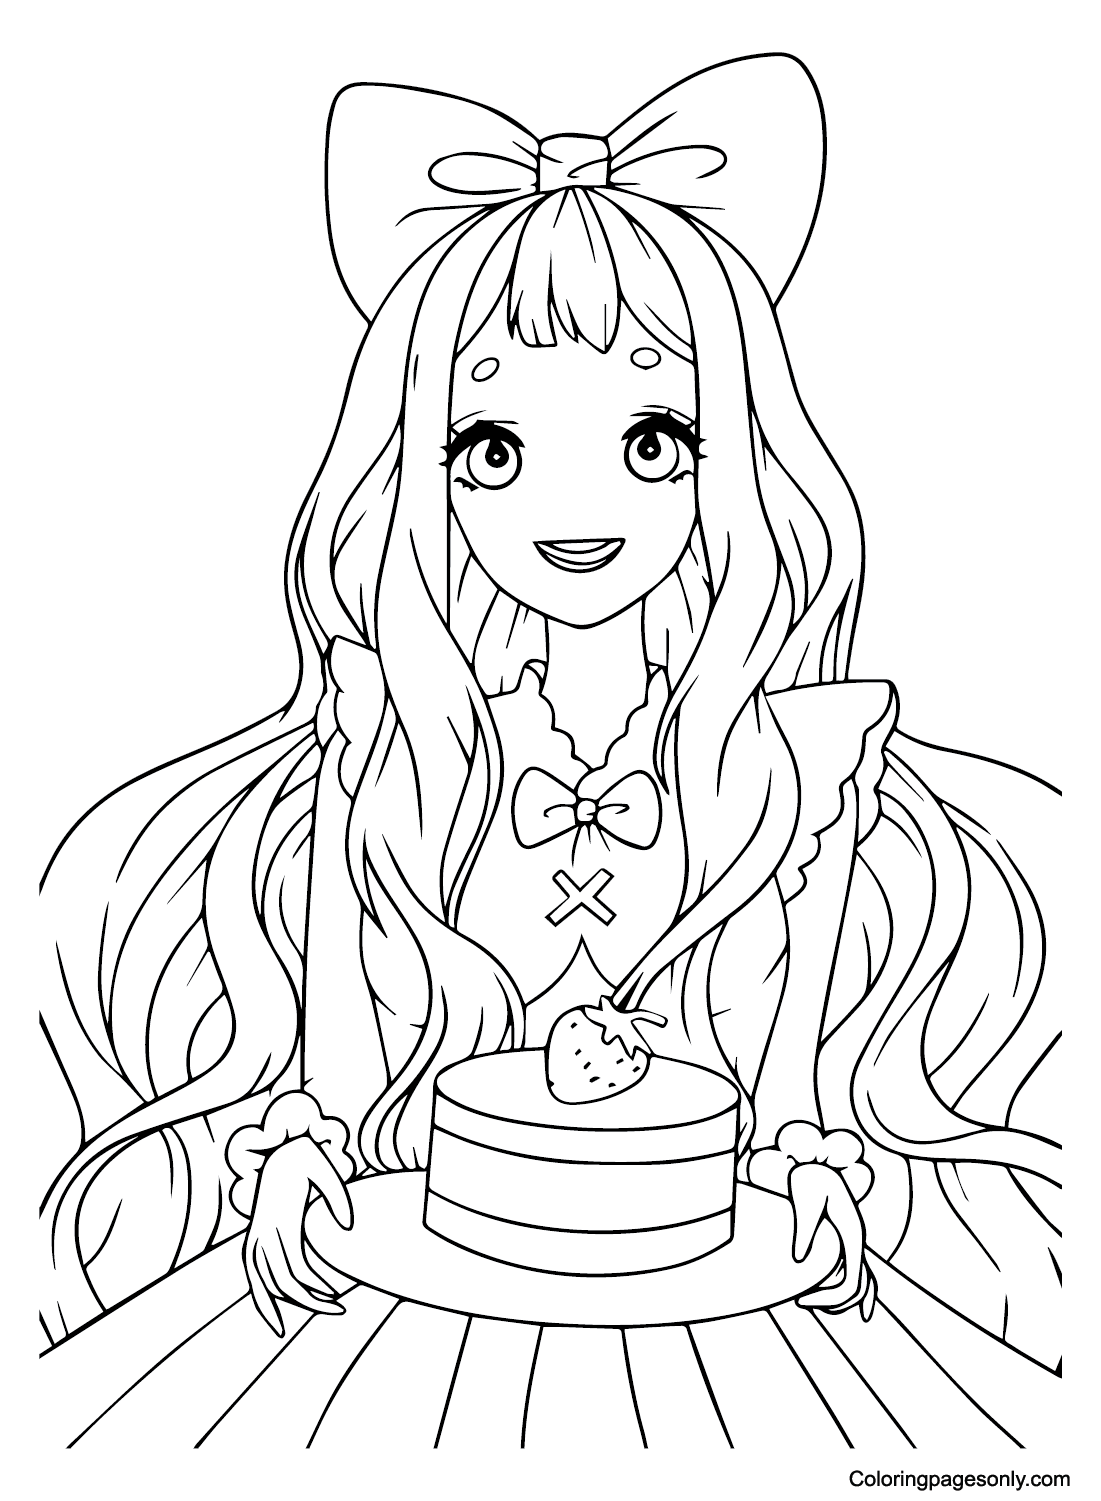 Teenage Girl with Cake Coloring Page